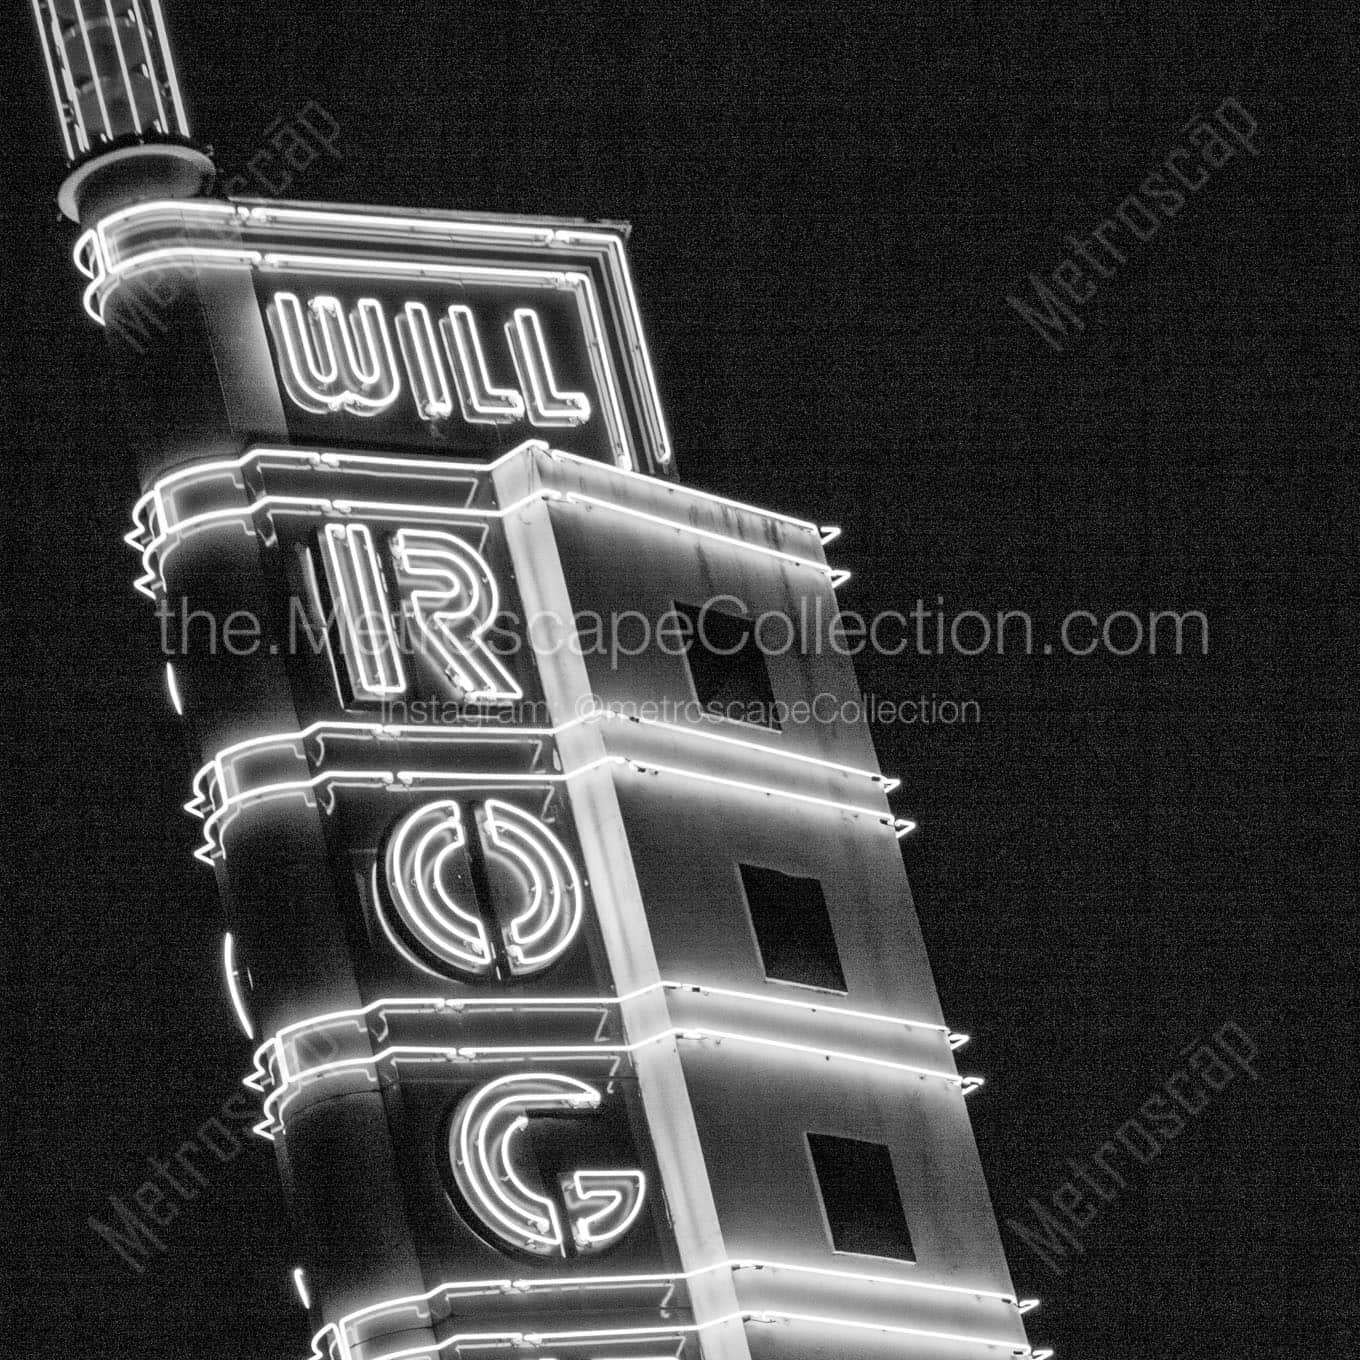 will rogers theater sign at night Black & White Wall Art